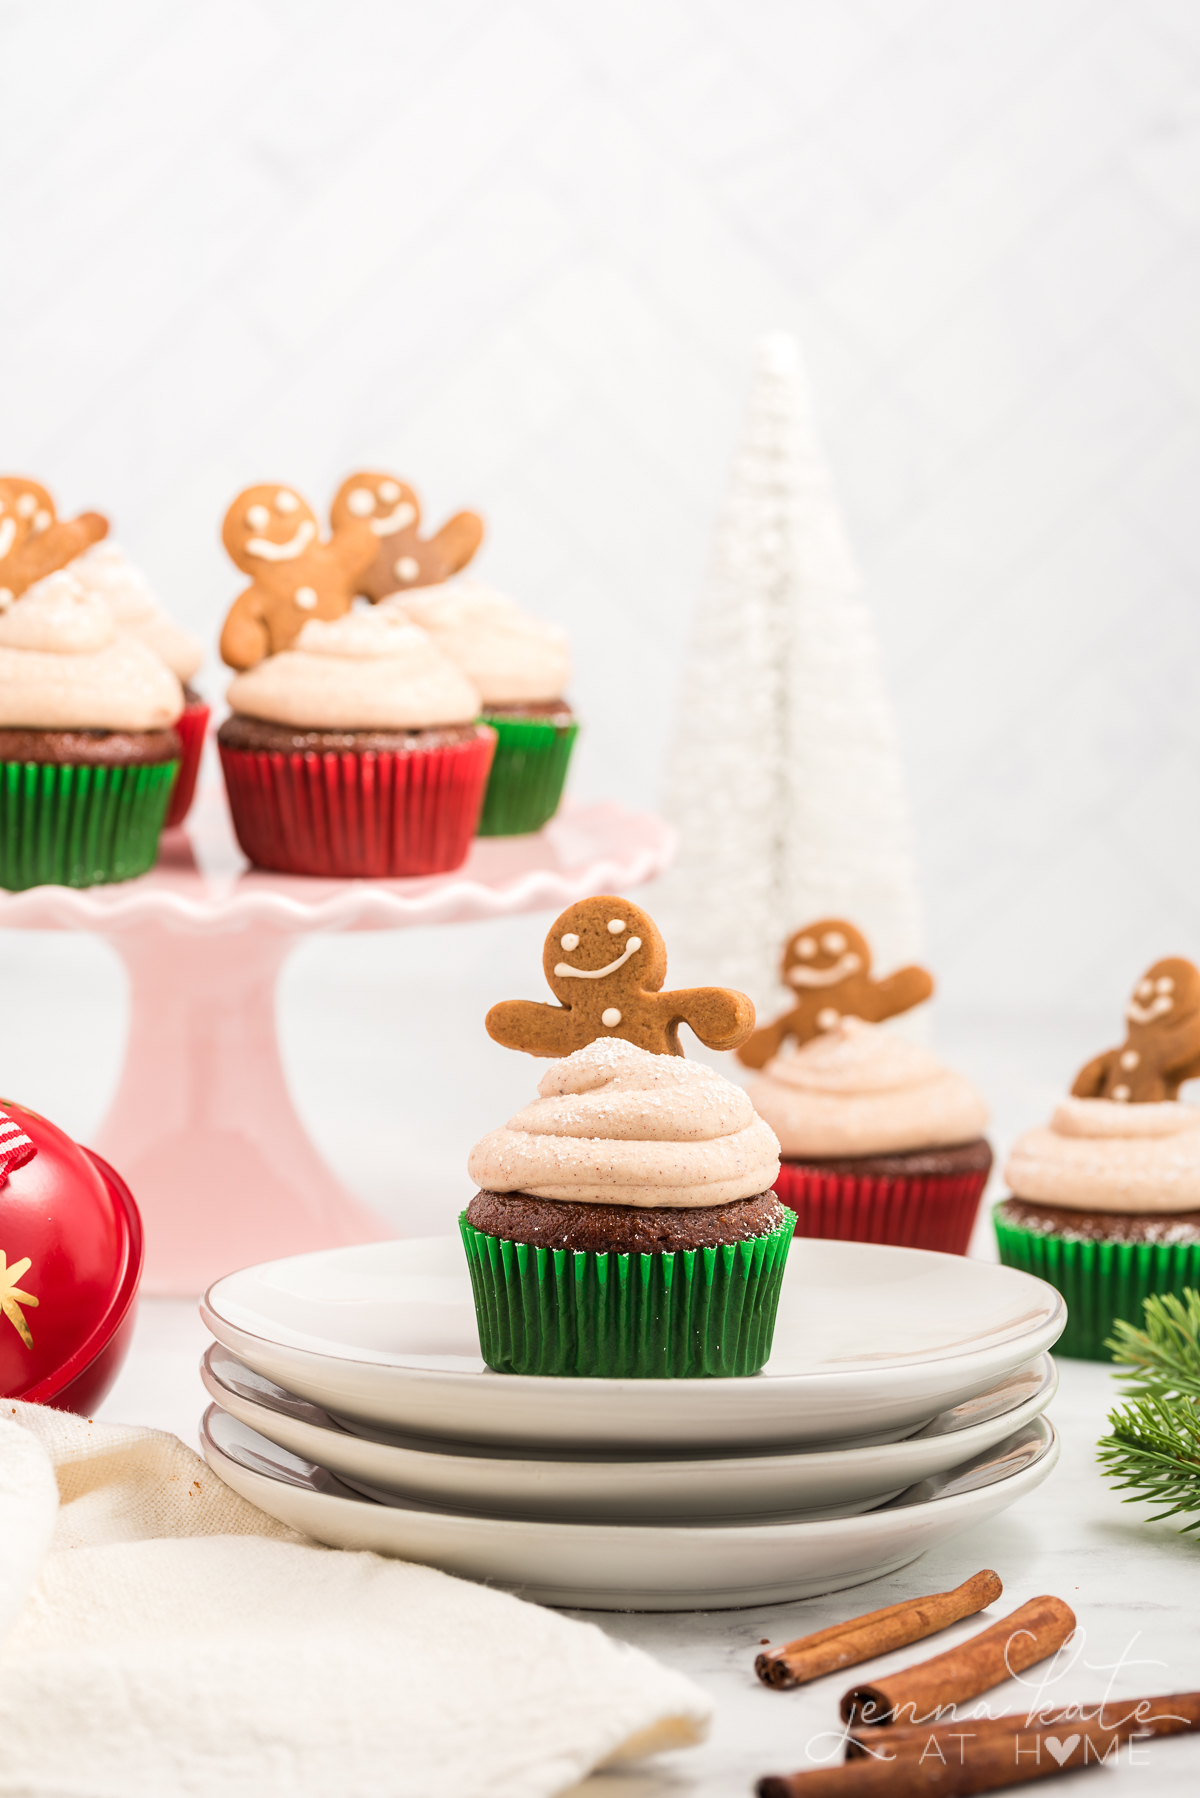 gingerbread cupcake with a mini gingerbread man stuck into the frosting